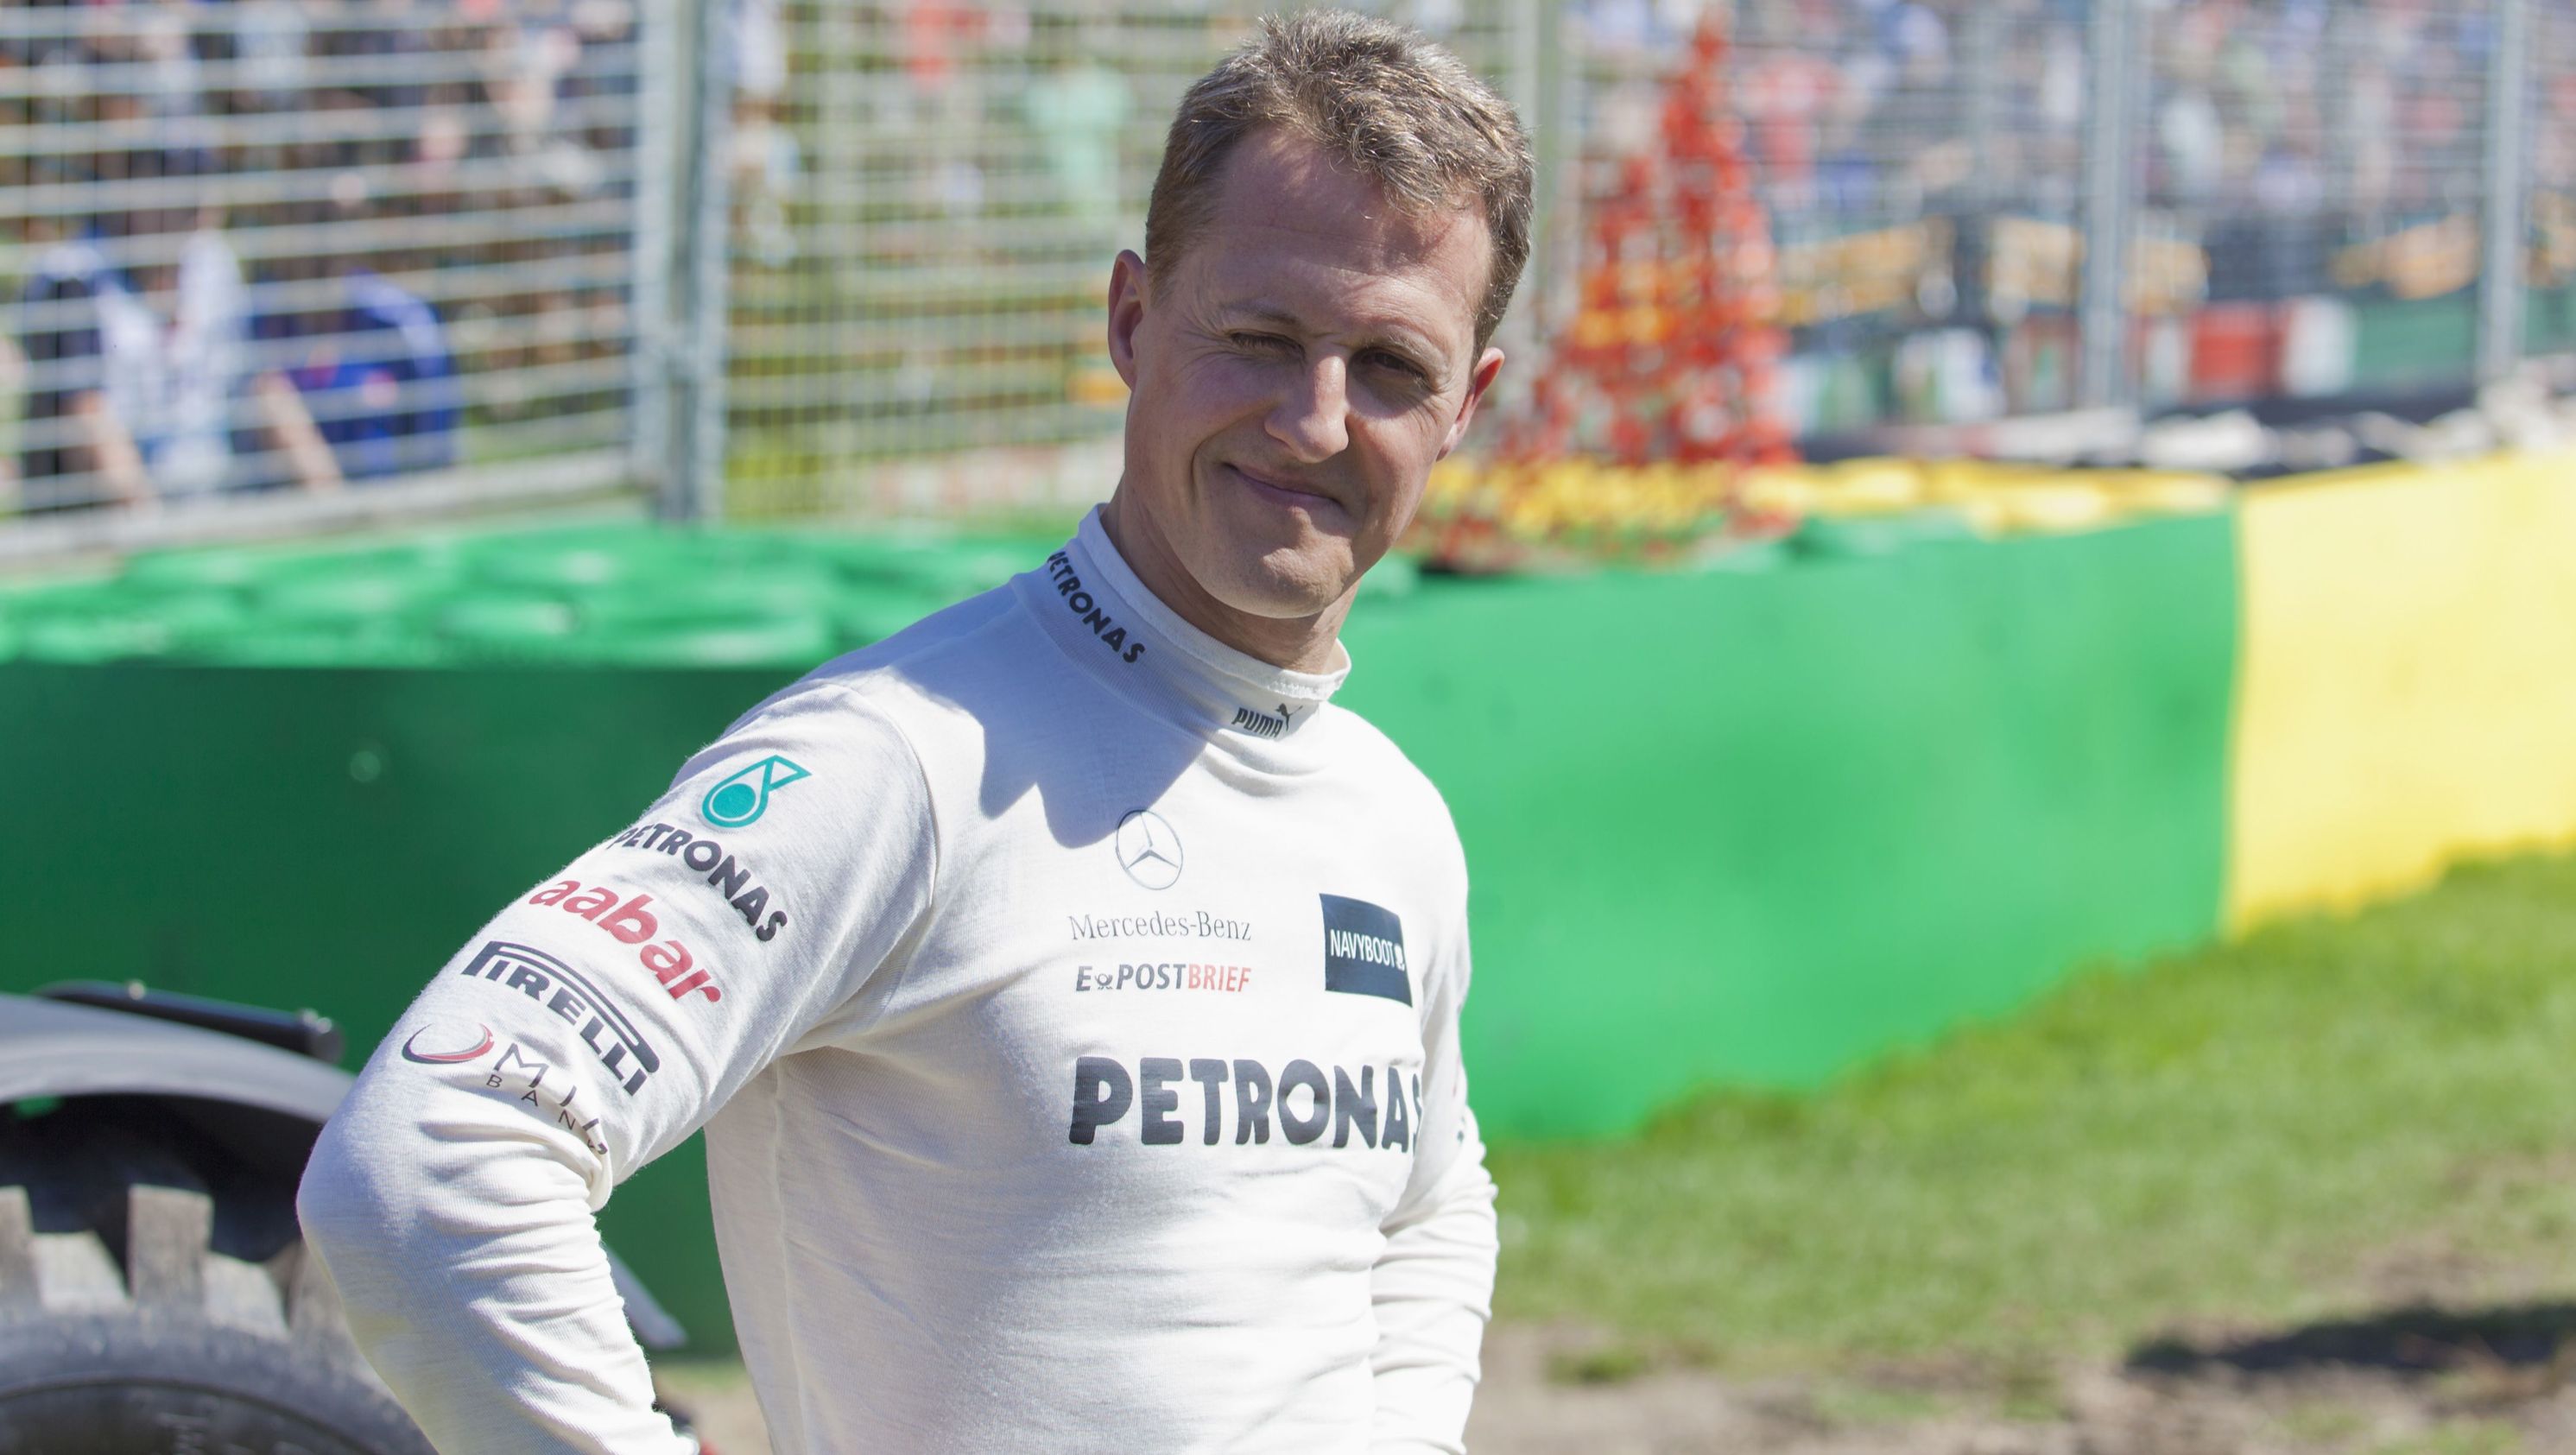 Michael Schumacher stands with hands on hips in white shirt.